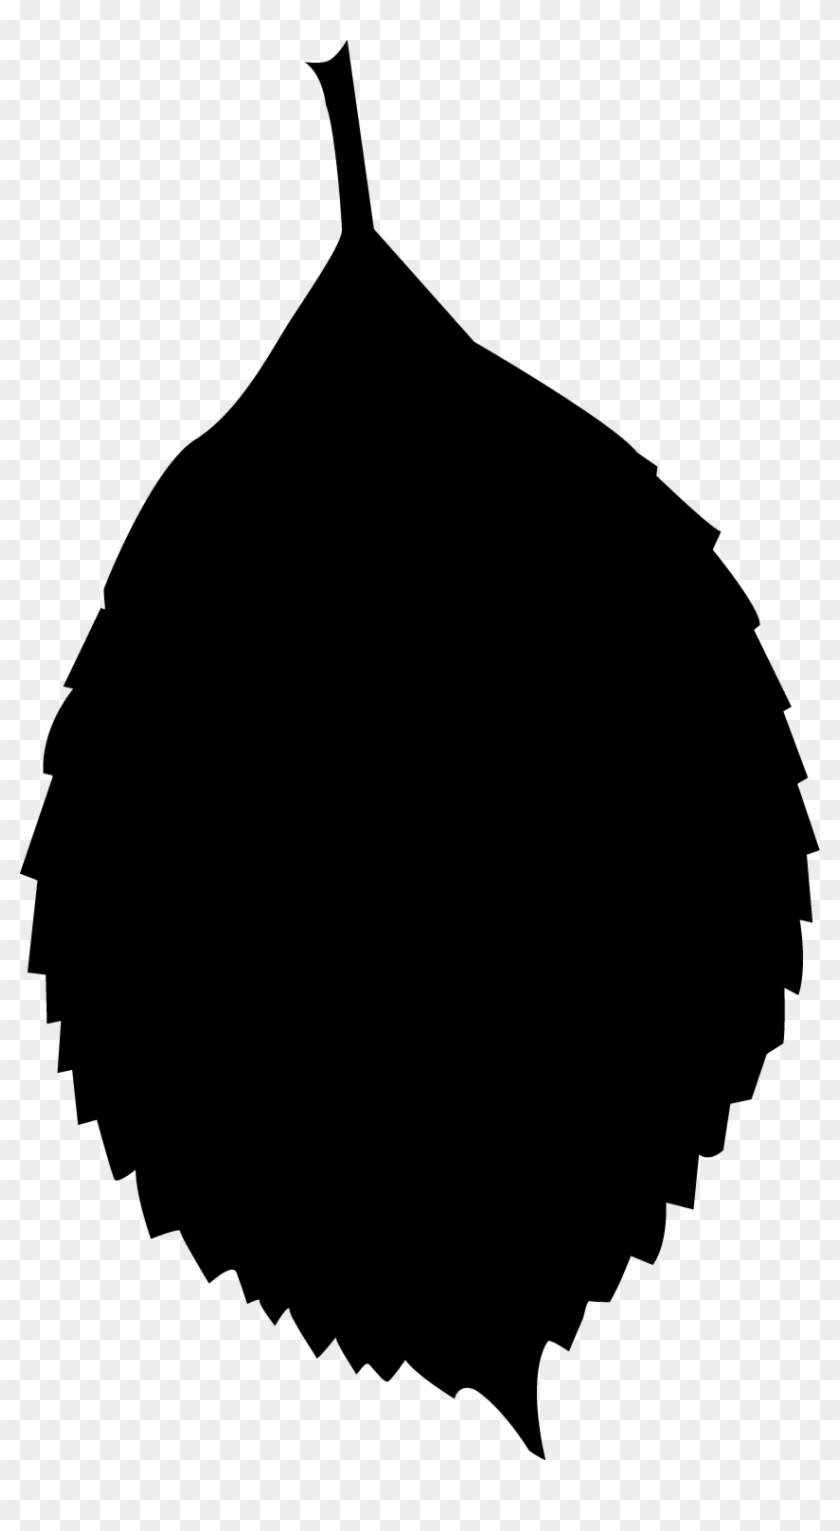 845 X 1500 7 - Leaf Silhouette Png Clipart #1551581